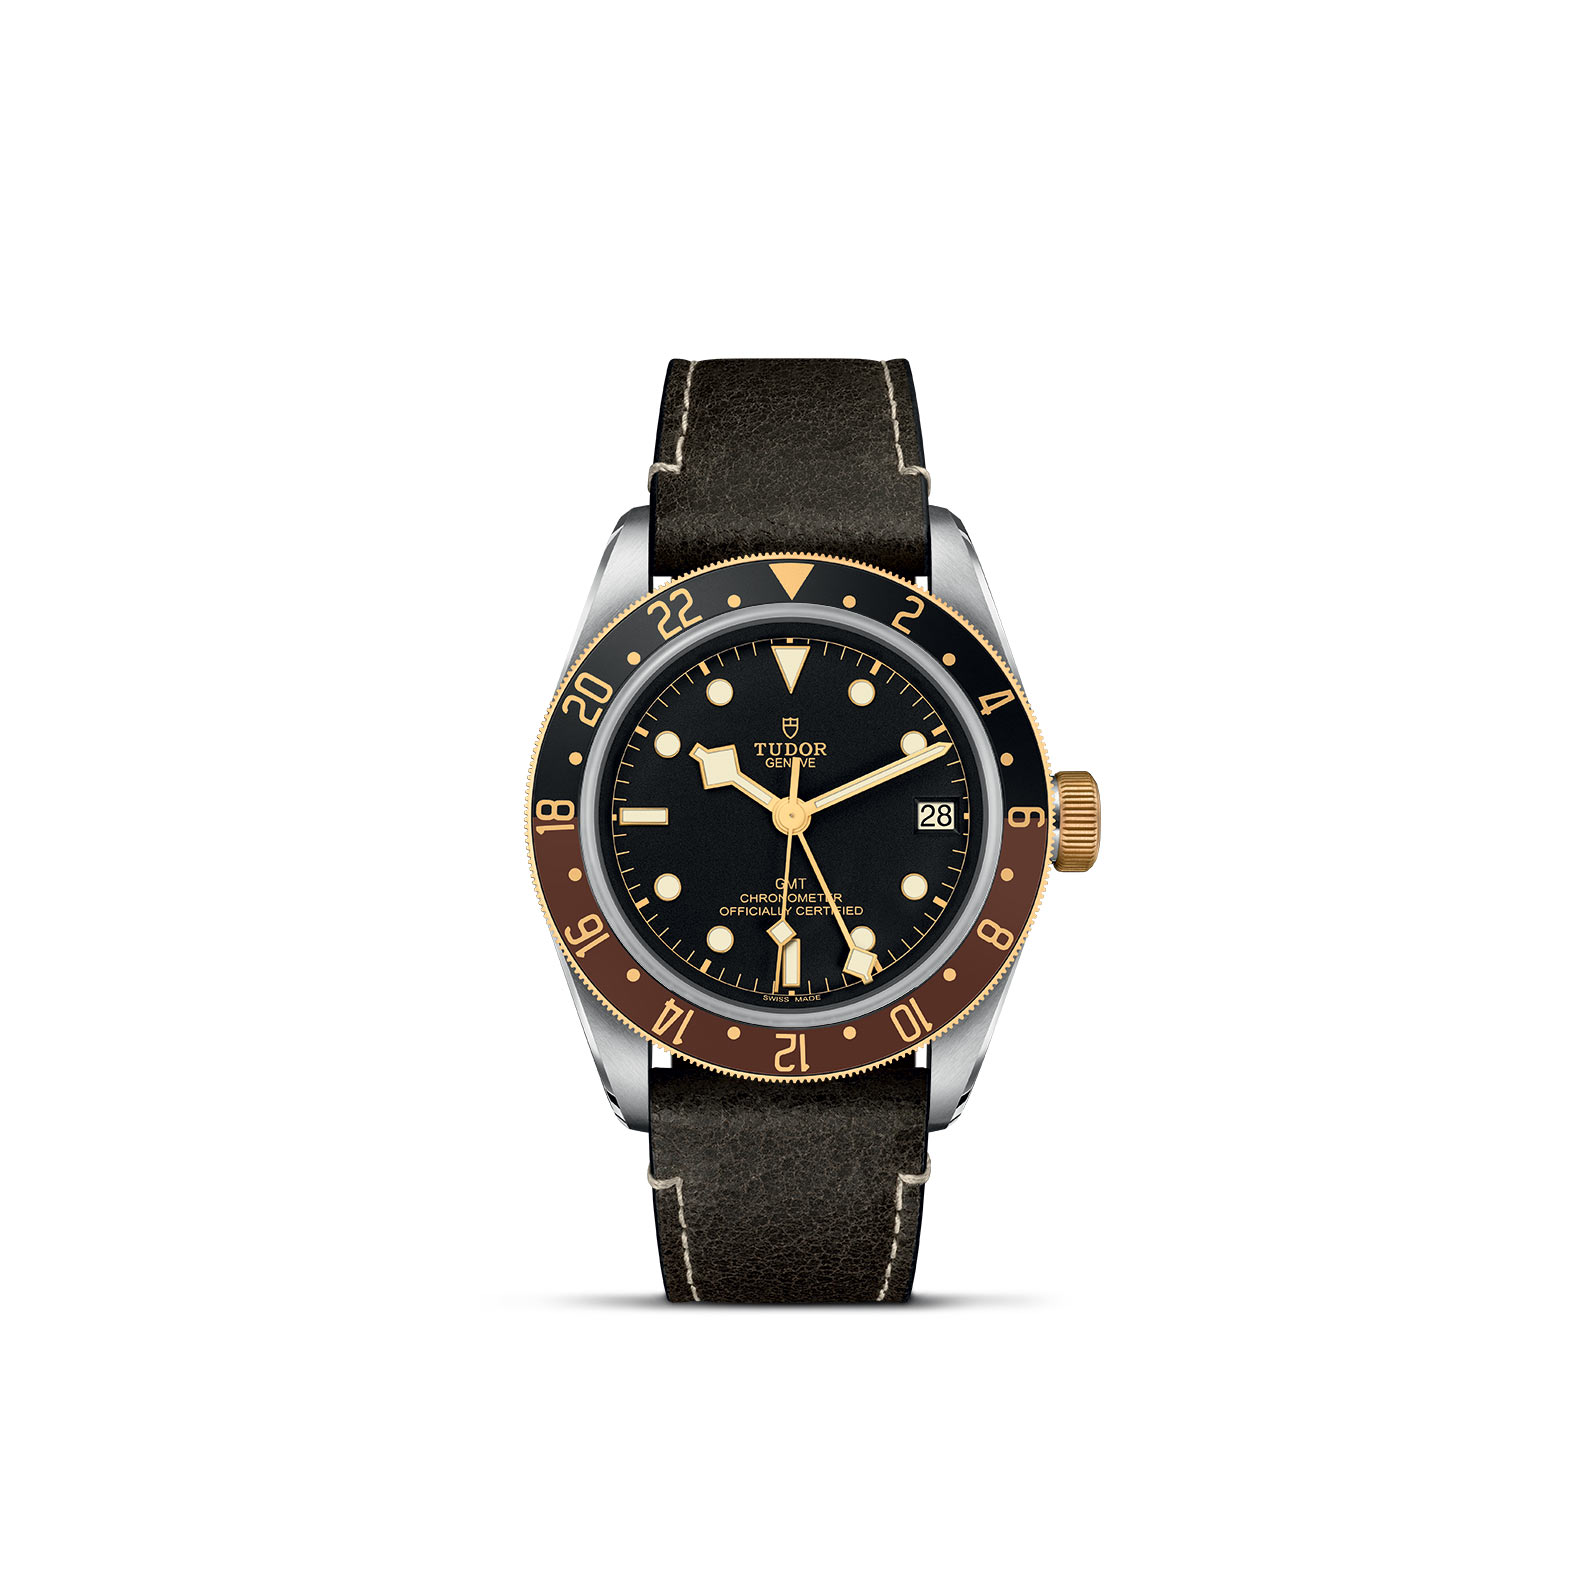 TUDOR BLACK BAY GMT standing upright, highlighting its classic design against a white background.